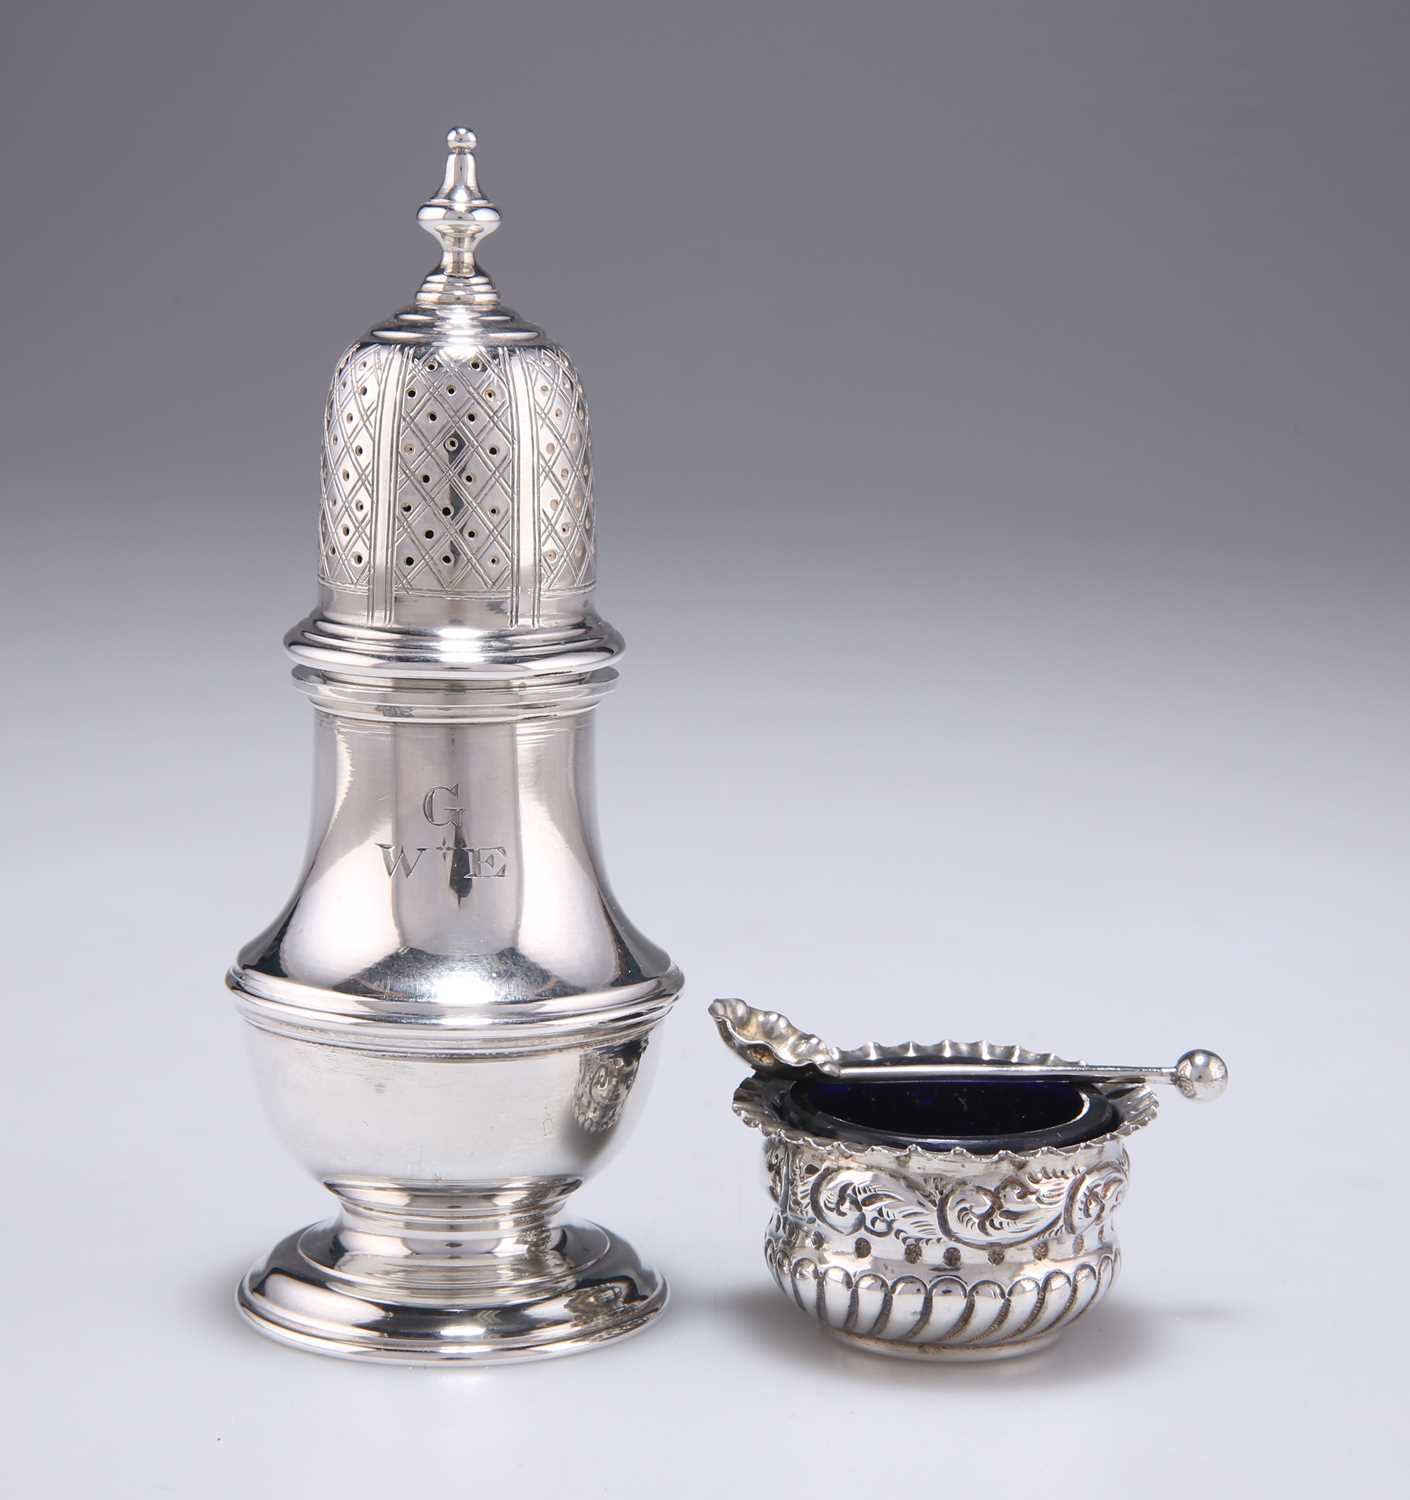 A PAIR OF LATE VICTORIAN SILVER SALTS, AND A PAIR OF LATE 19TH CENTURY AMERICAN SILVER CASTERS - Image 2 of 2